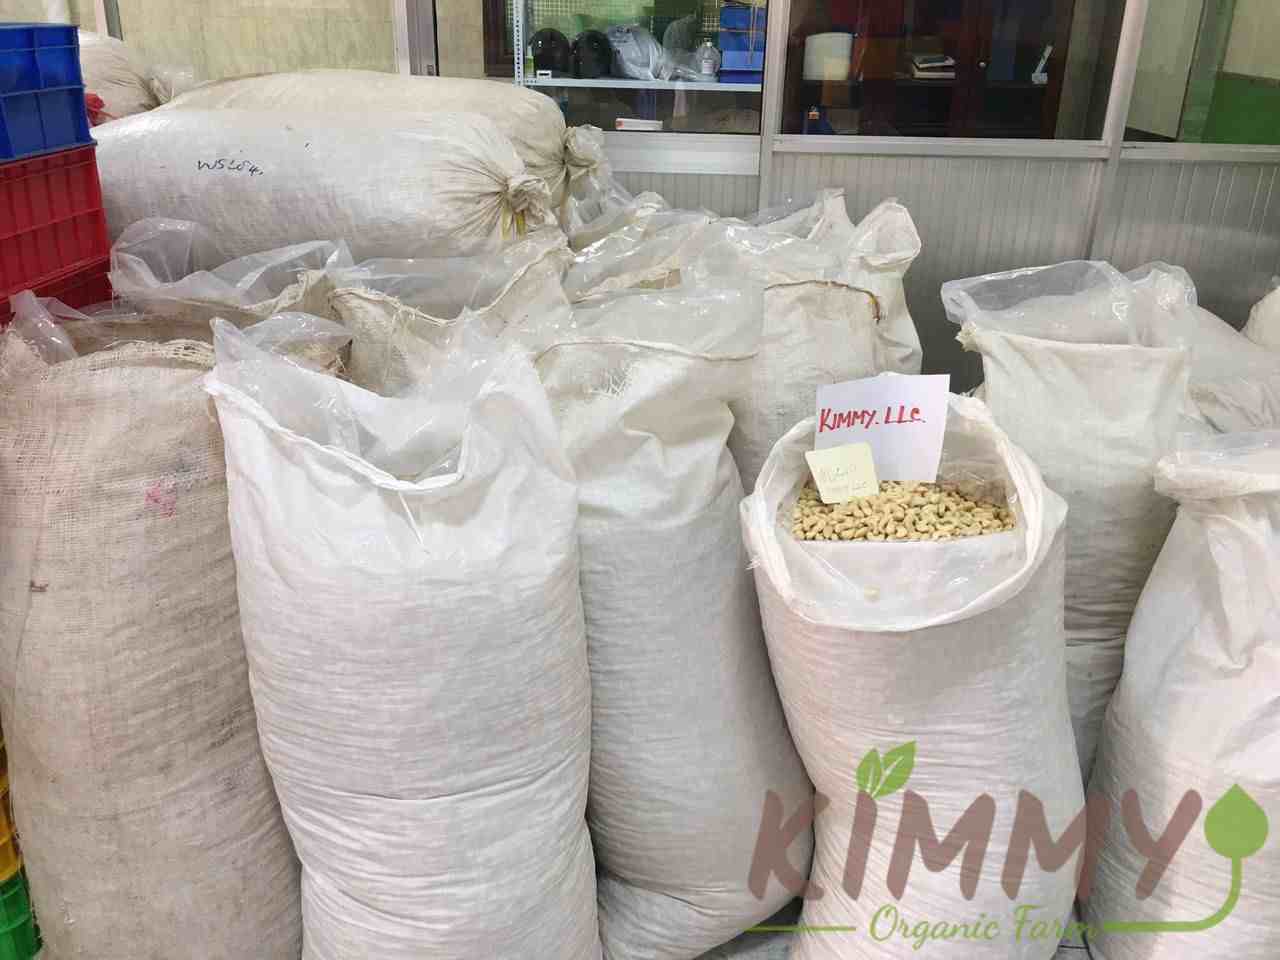 Vietnam W240 Cashew Nut White Whole Cashews High Quality Ready For Export Raw Image Of W240 From Our Cashew Factory! 6